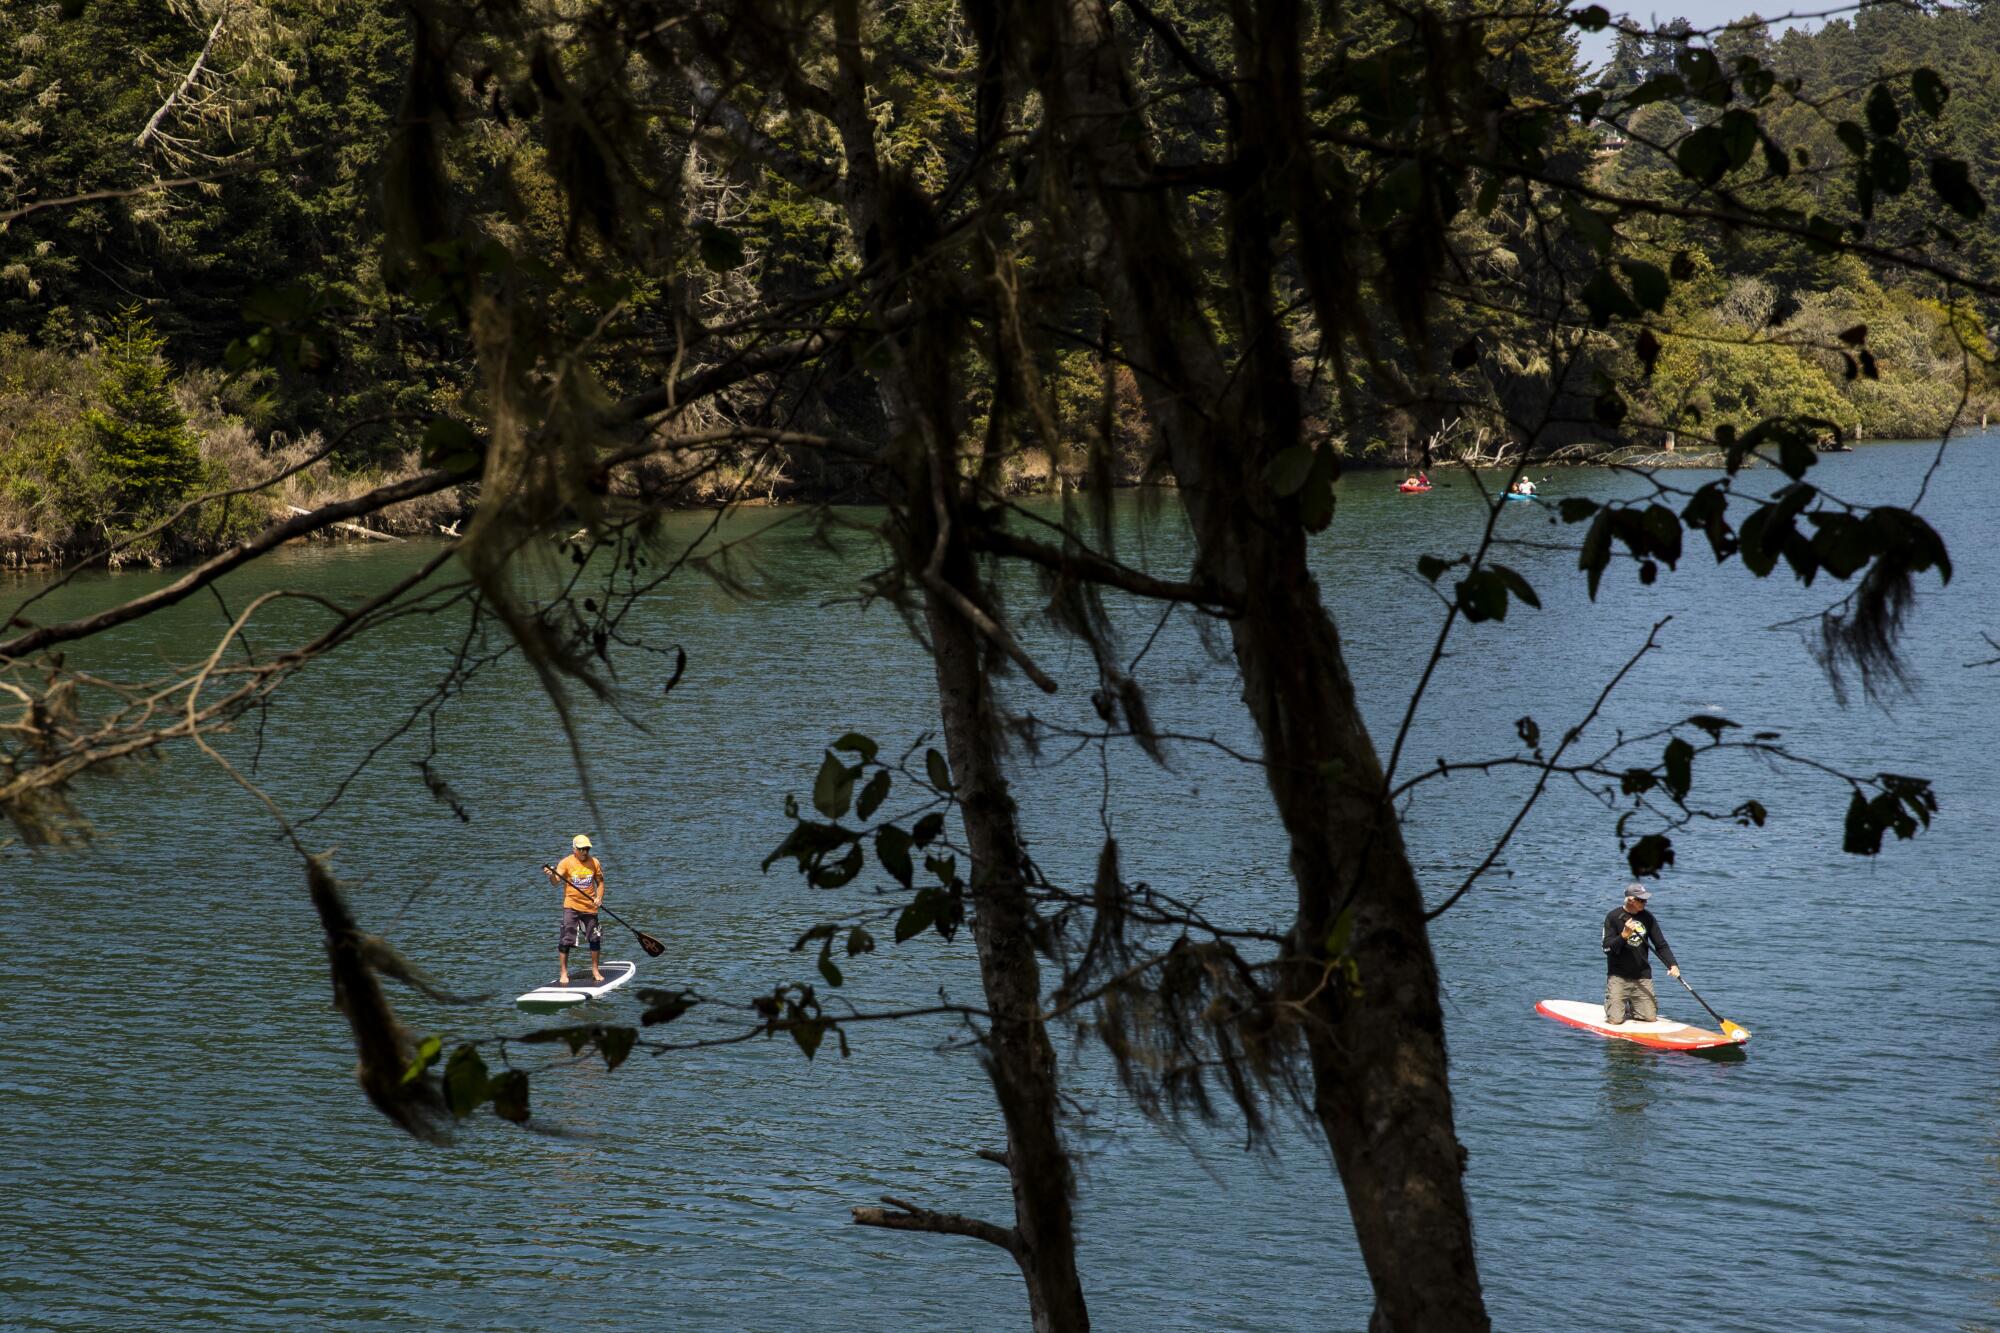 Paddle boarders on the Noyo River in Fort Bragg, Calif. The drought comes as a surprise to many visitors.